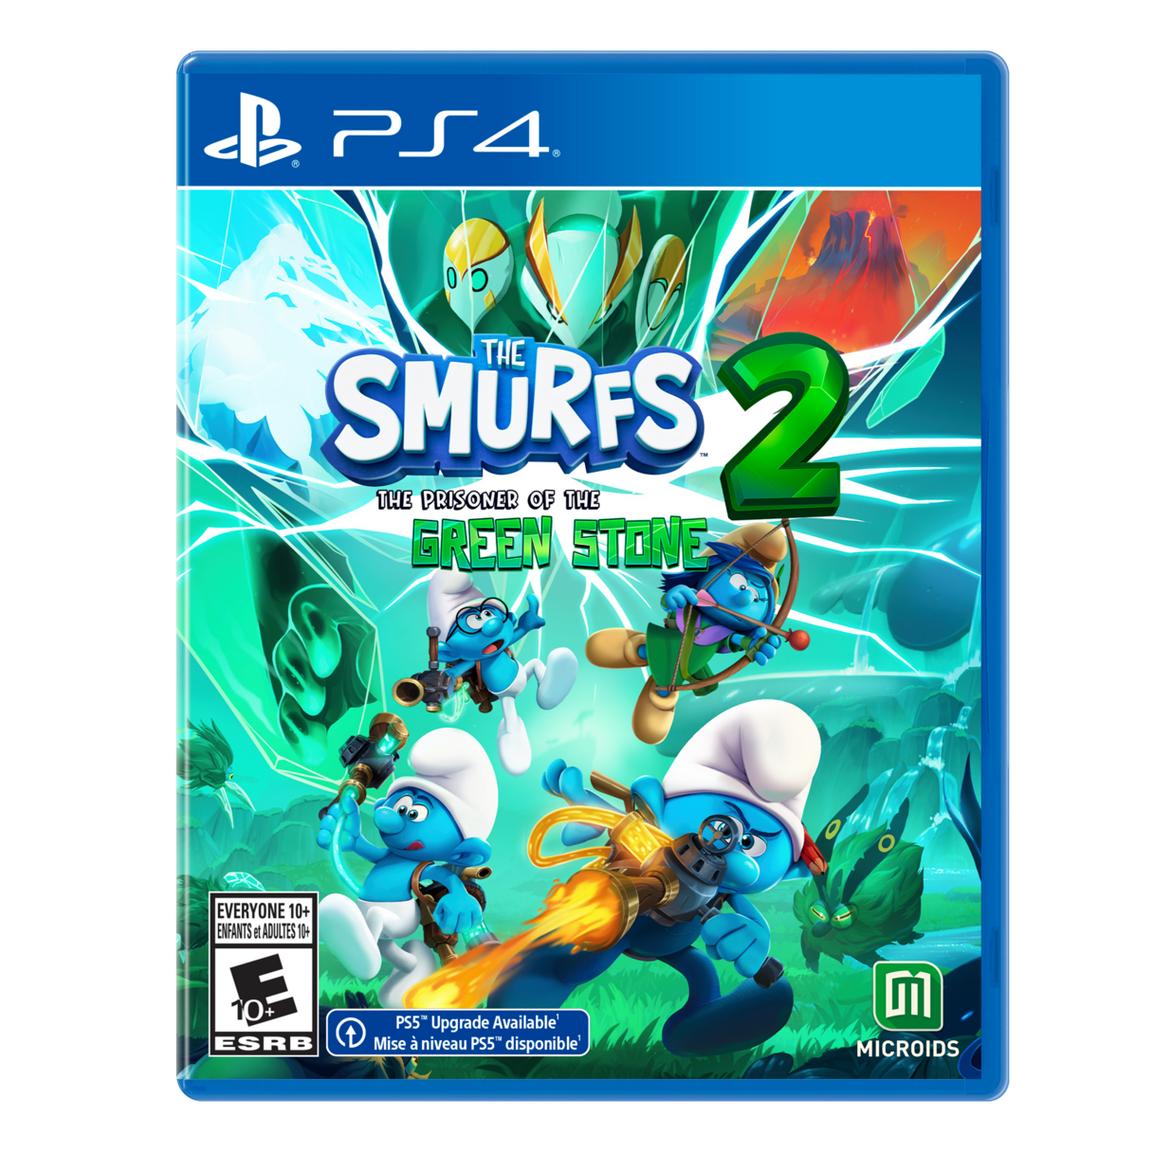 Видеоигра The Smurfs 2: Prisoner of the Green Stone - PlayStation 4 ps4 игра microids asterix